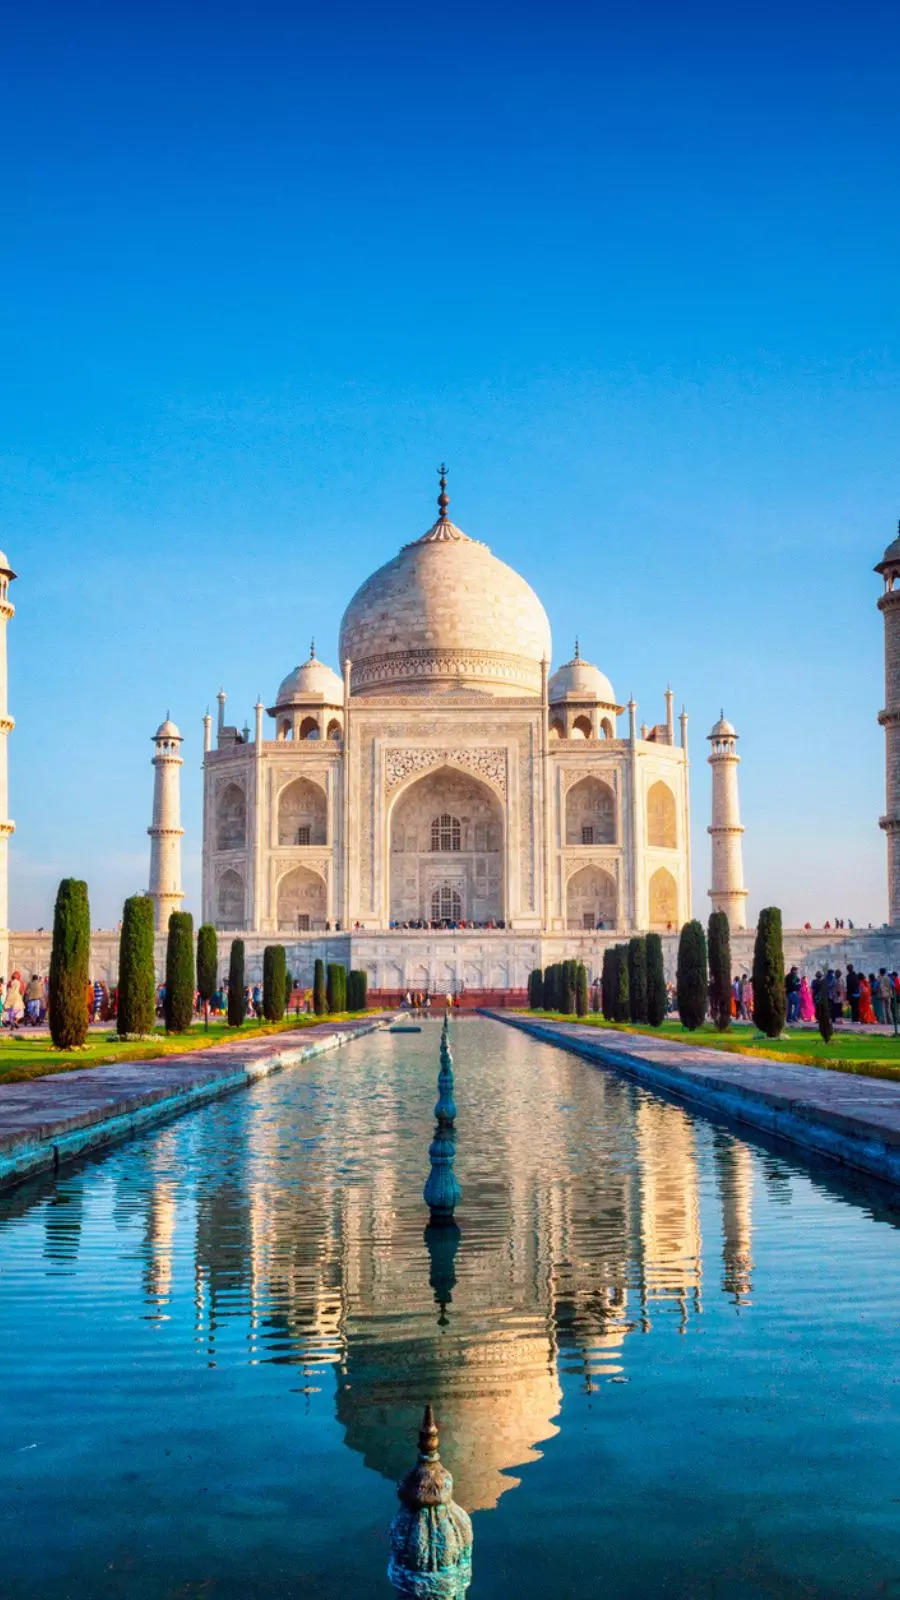 Perhaps India's most iconic landmark, the Taj Mahal in Agra is renowned for its stunning white marble architecture and romantic history as a UNESCO World Heritage site.